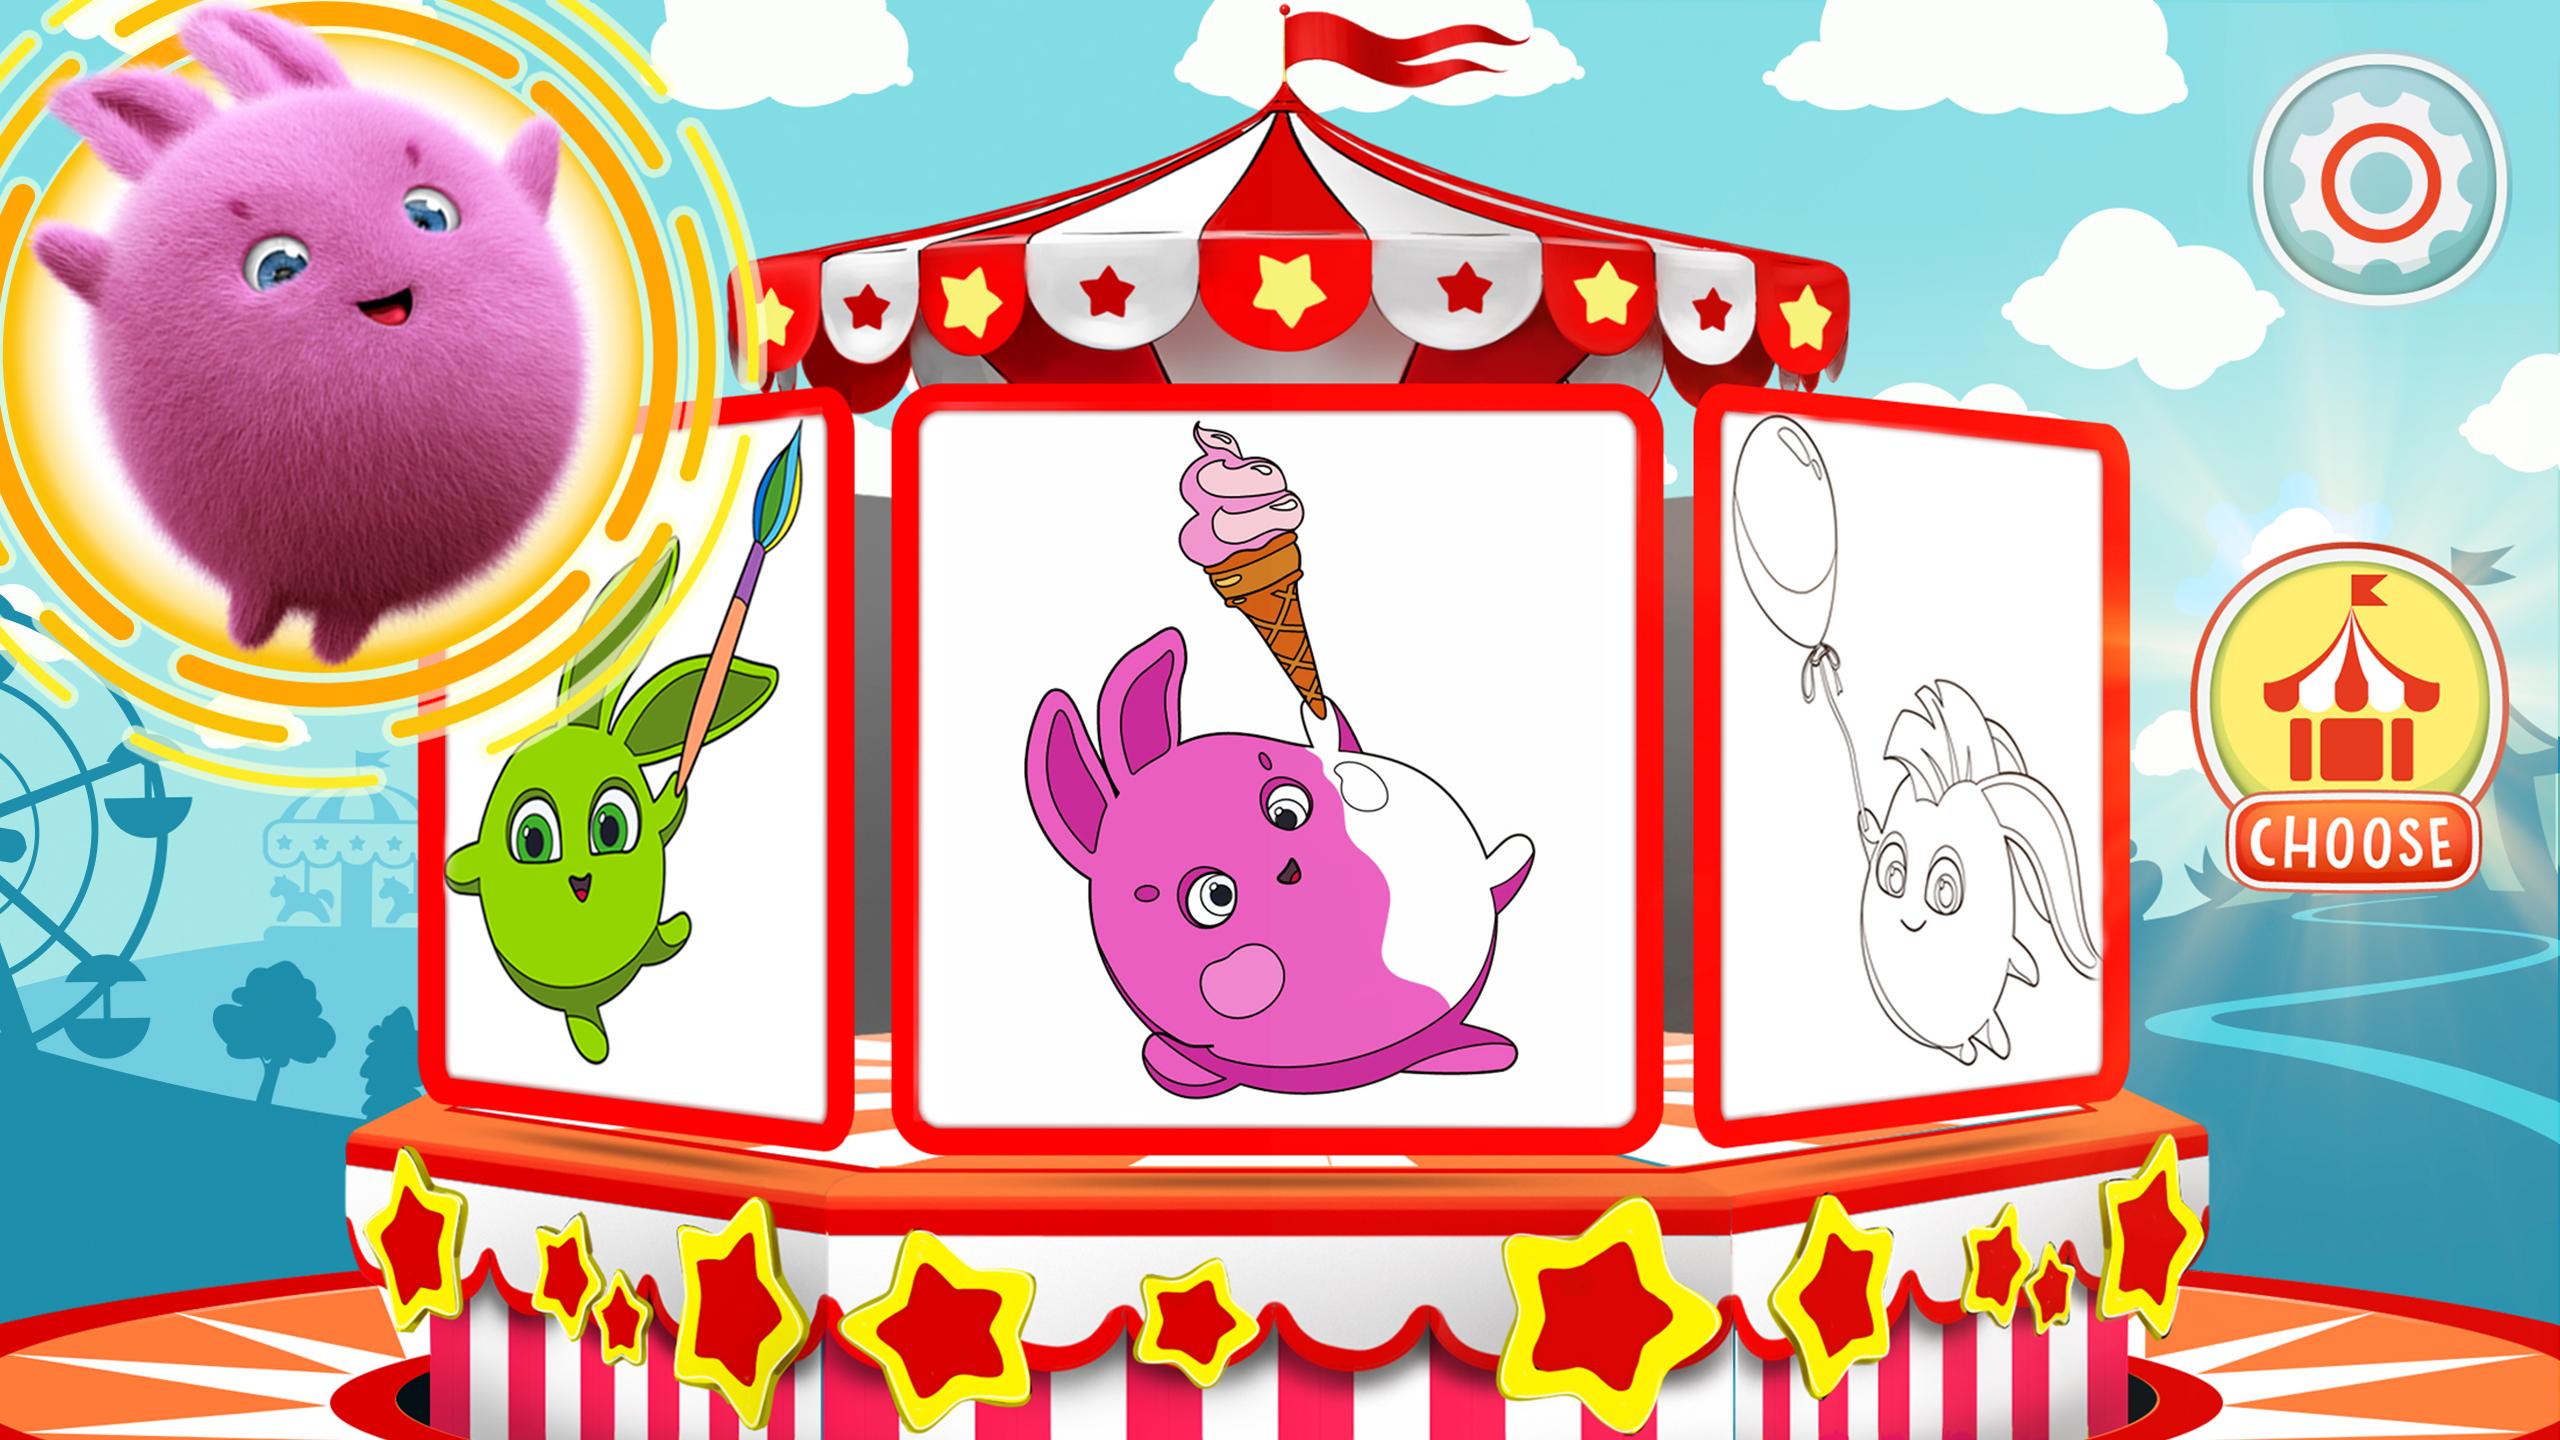 Coloring book sunny bunnies все открыто. Sunny Bunnies игра. Sunny Bunnies Coloring. Sunny Bunnies Magic Pop. Sunny Bunnies Coloring Pages.